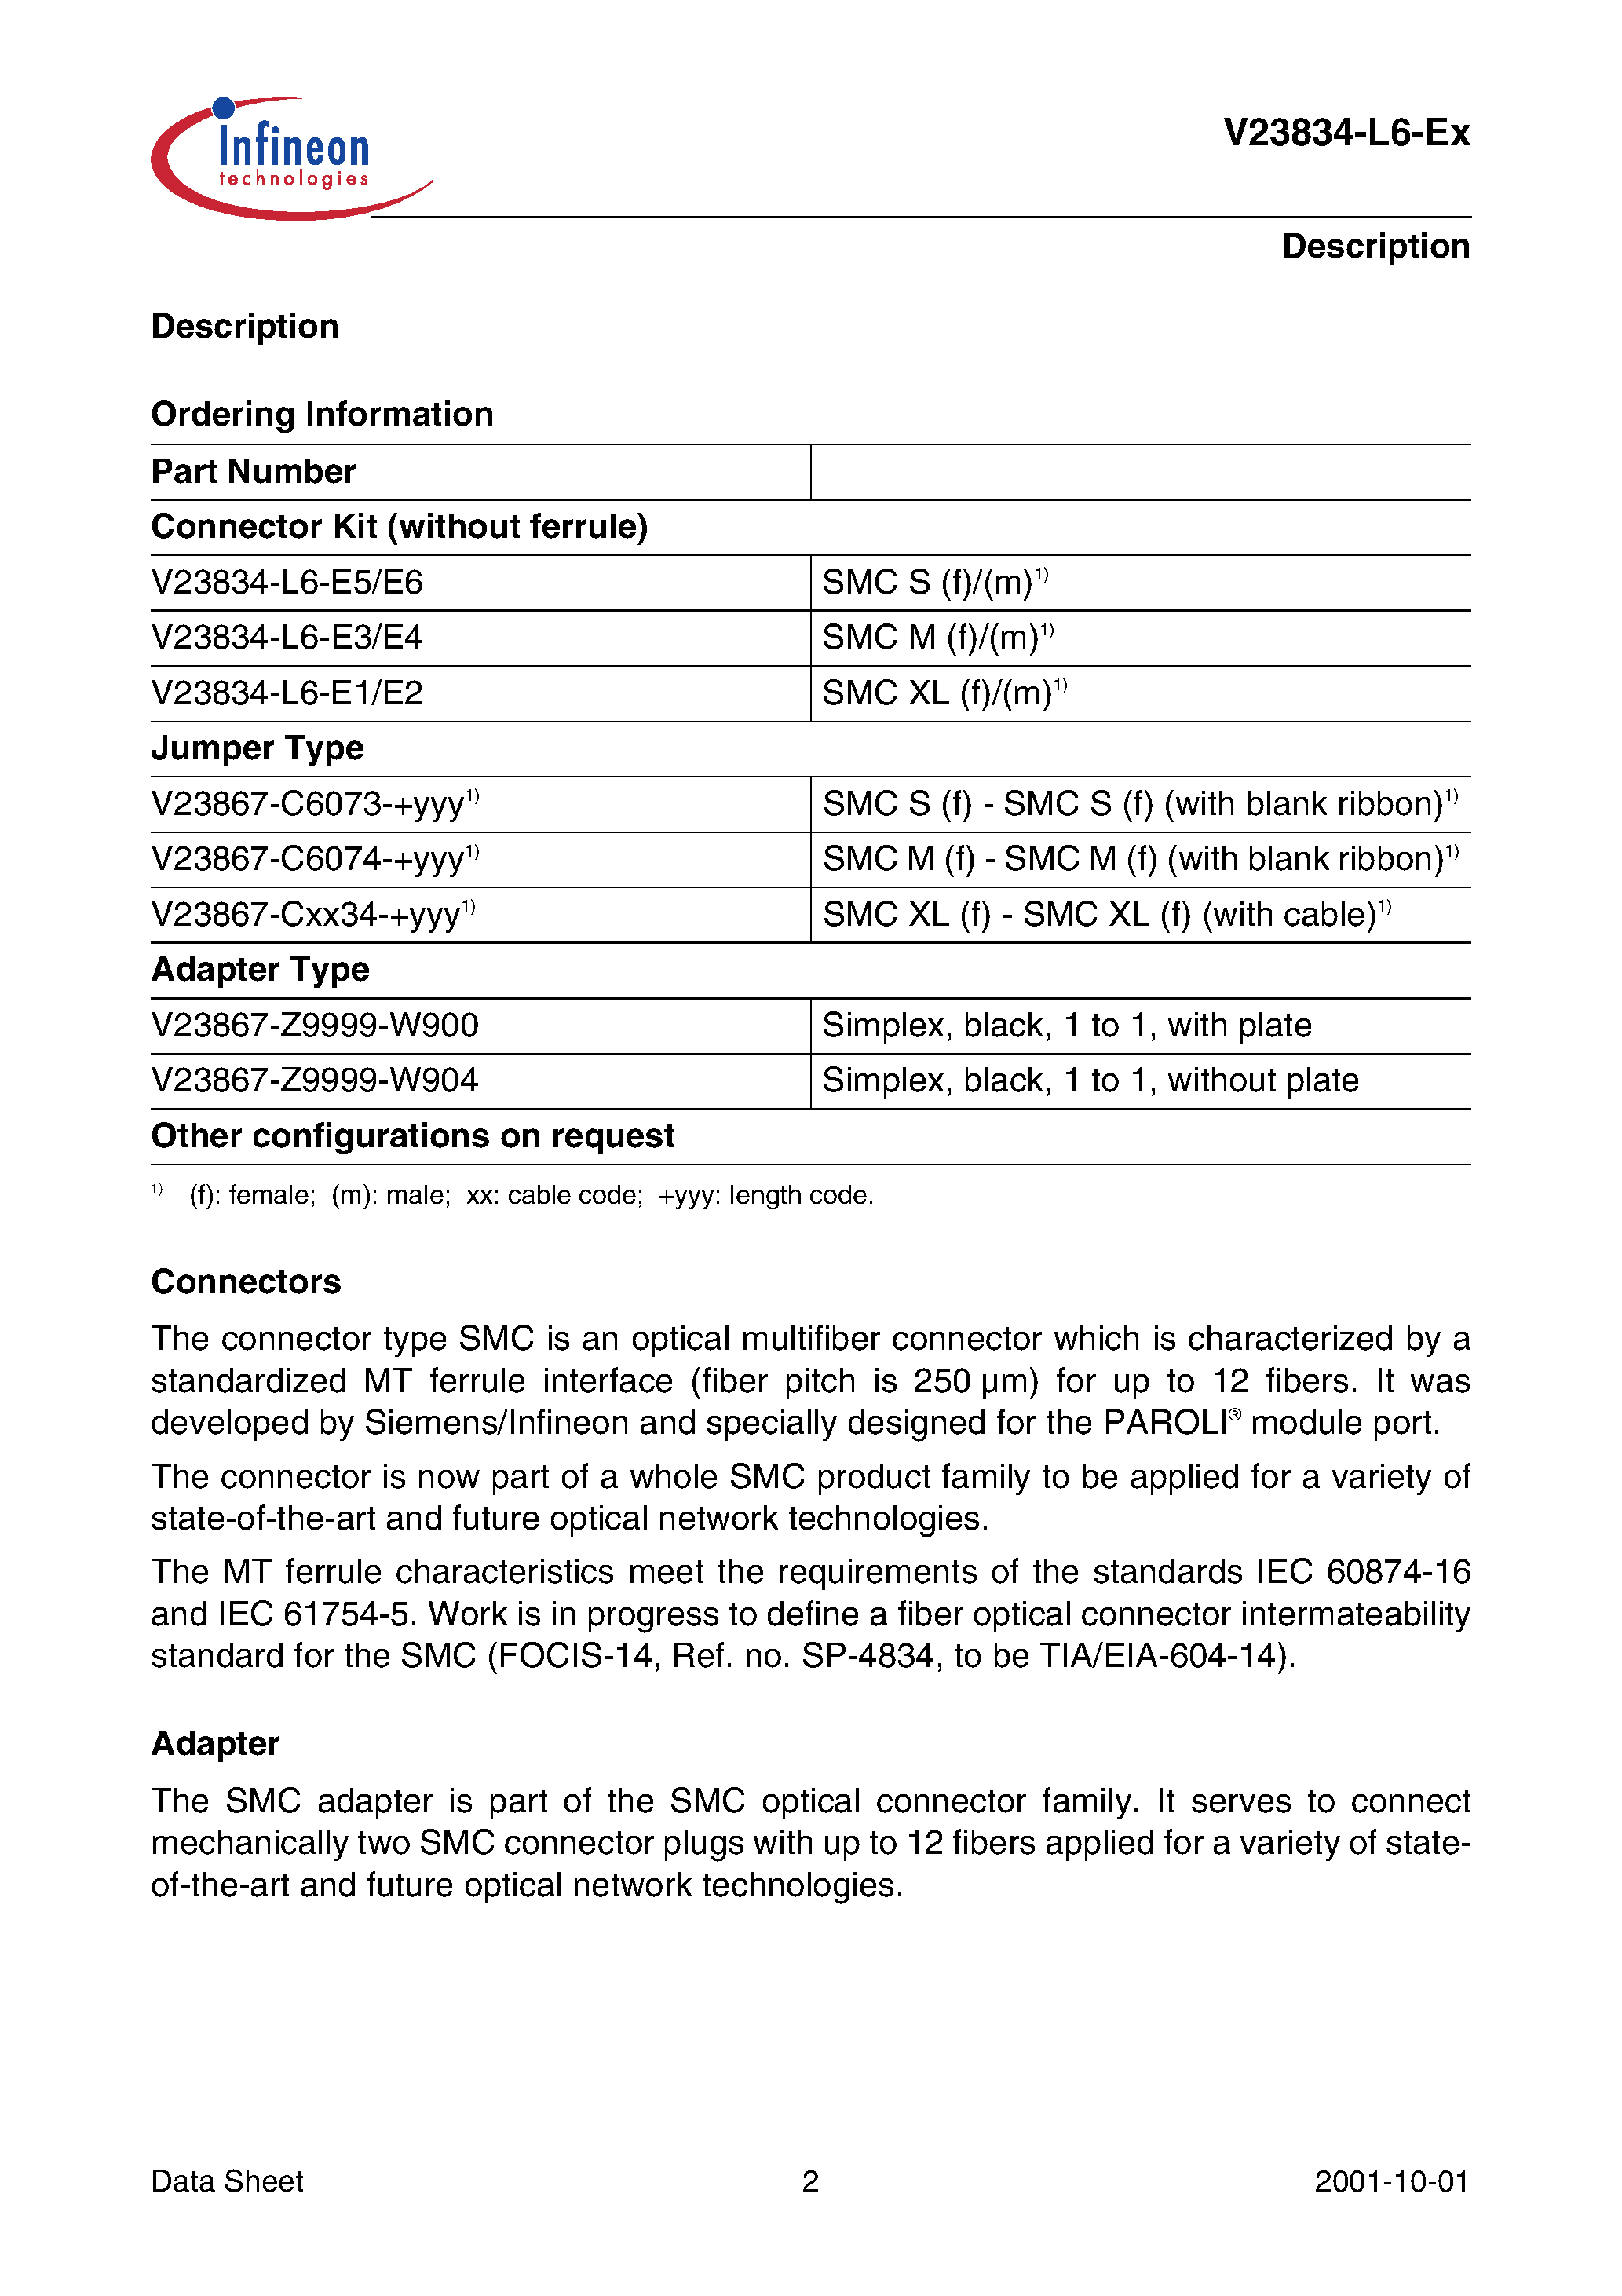 Datasheet V23834-L6-E1 - SMCTM S/ M/ L/ XL Connector page 2